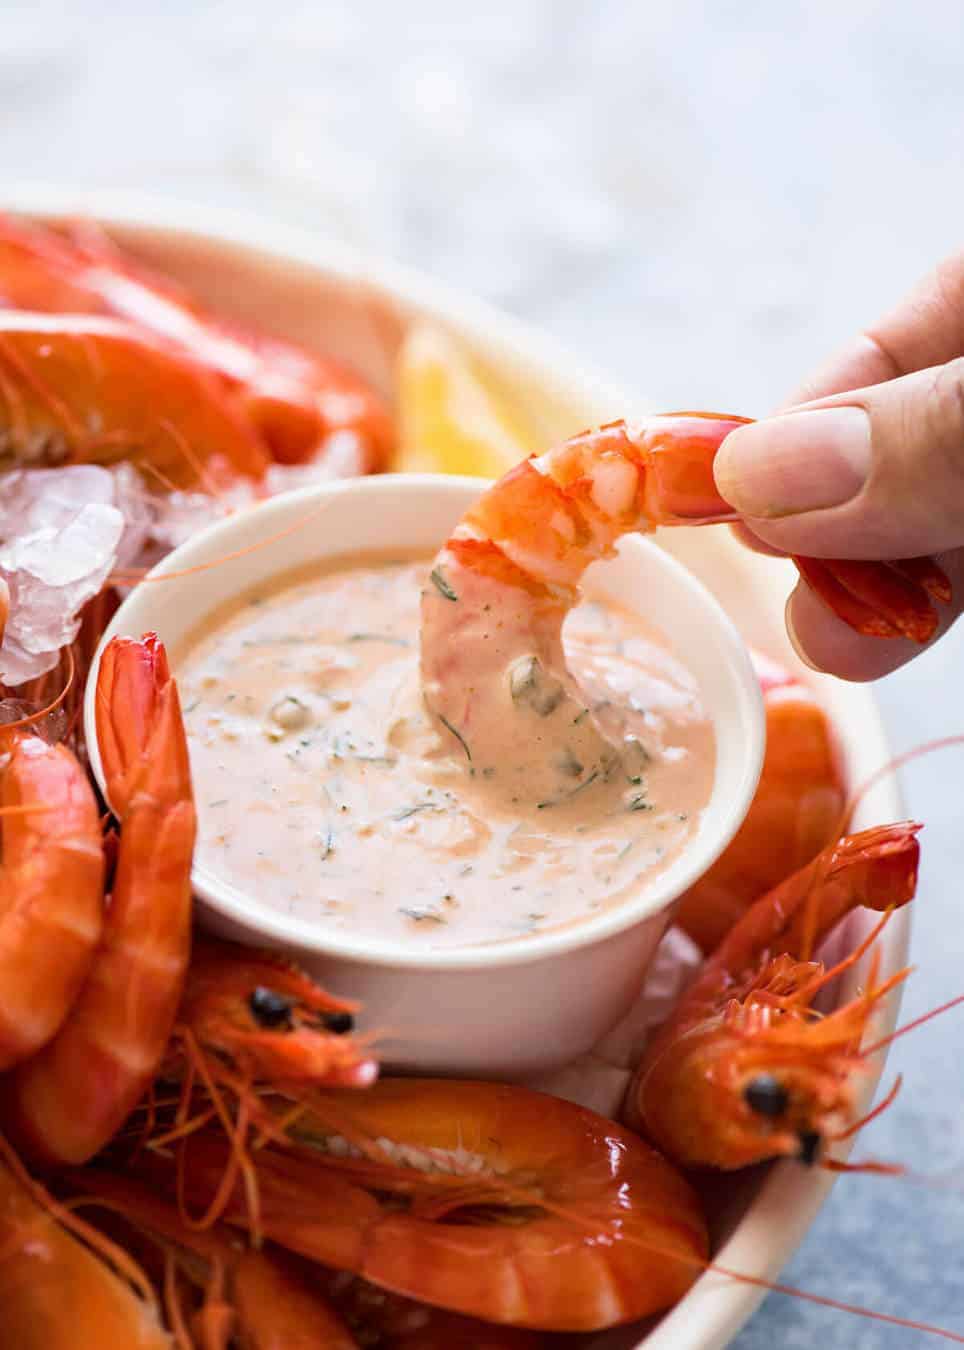 Our favourite Dipping Sauce for Prawns (Shrimp), essentially a jacked up Marie Rose / Thousand Island sauce. recipetineats.com